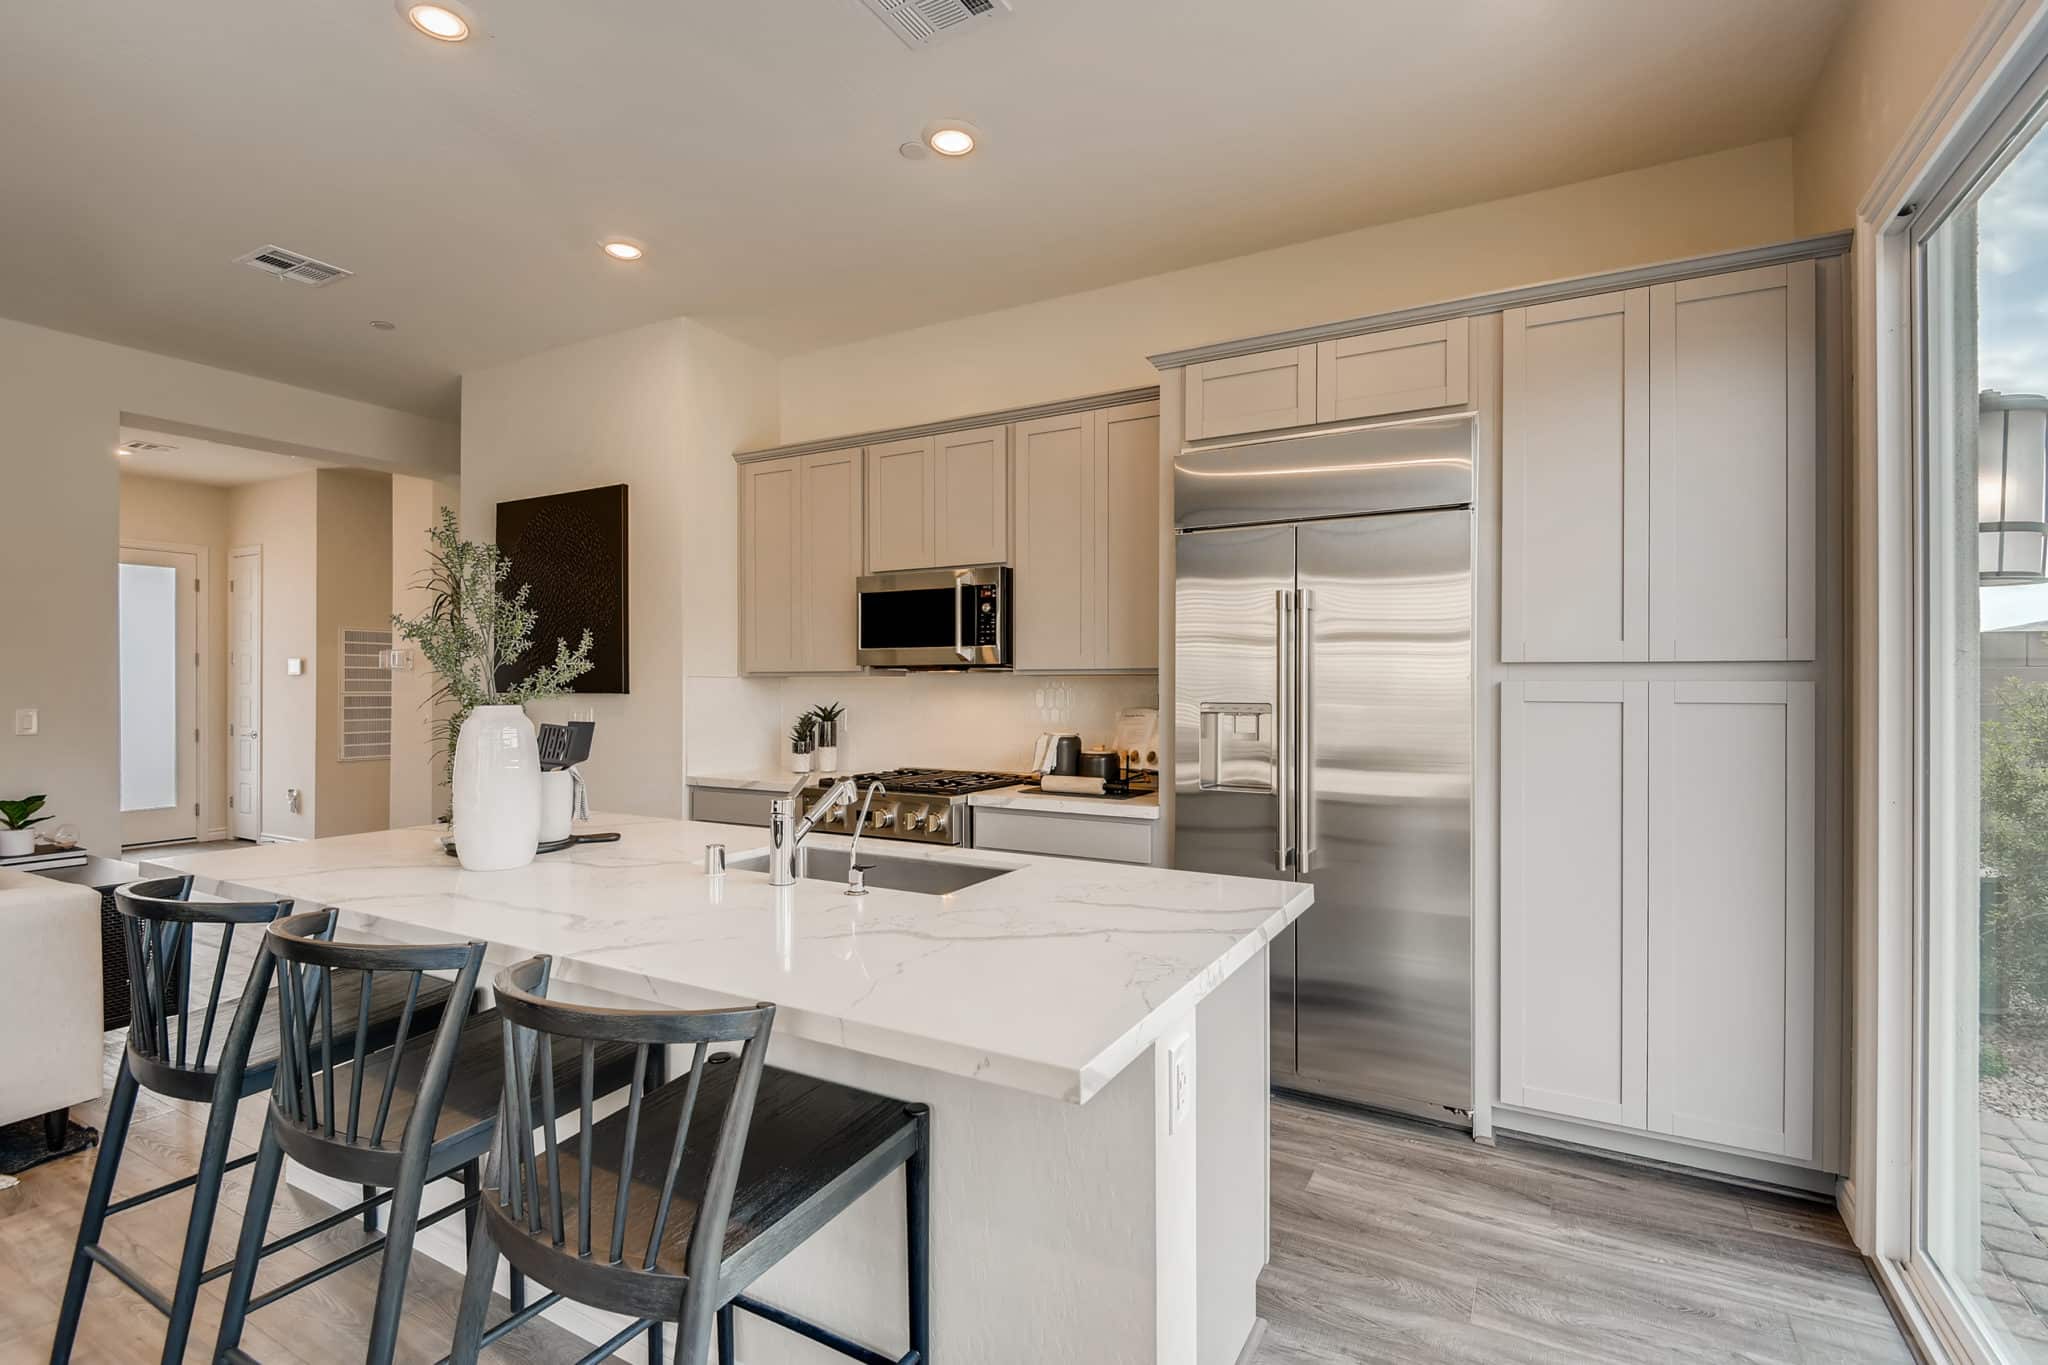 Kitchen of Claremont model at Heritage by Lennar